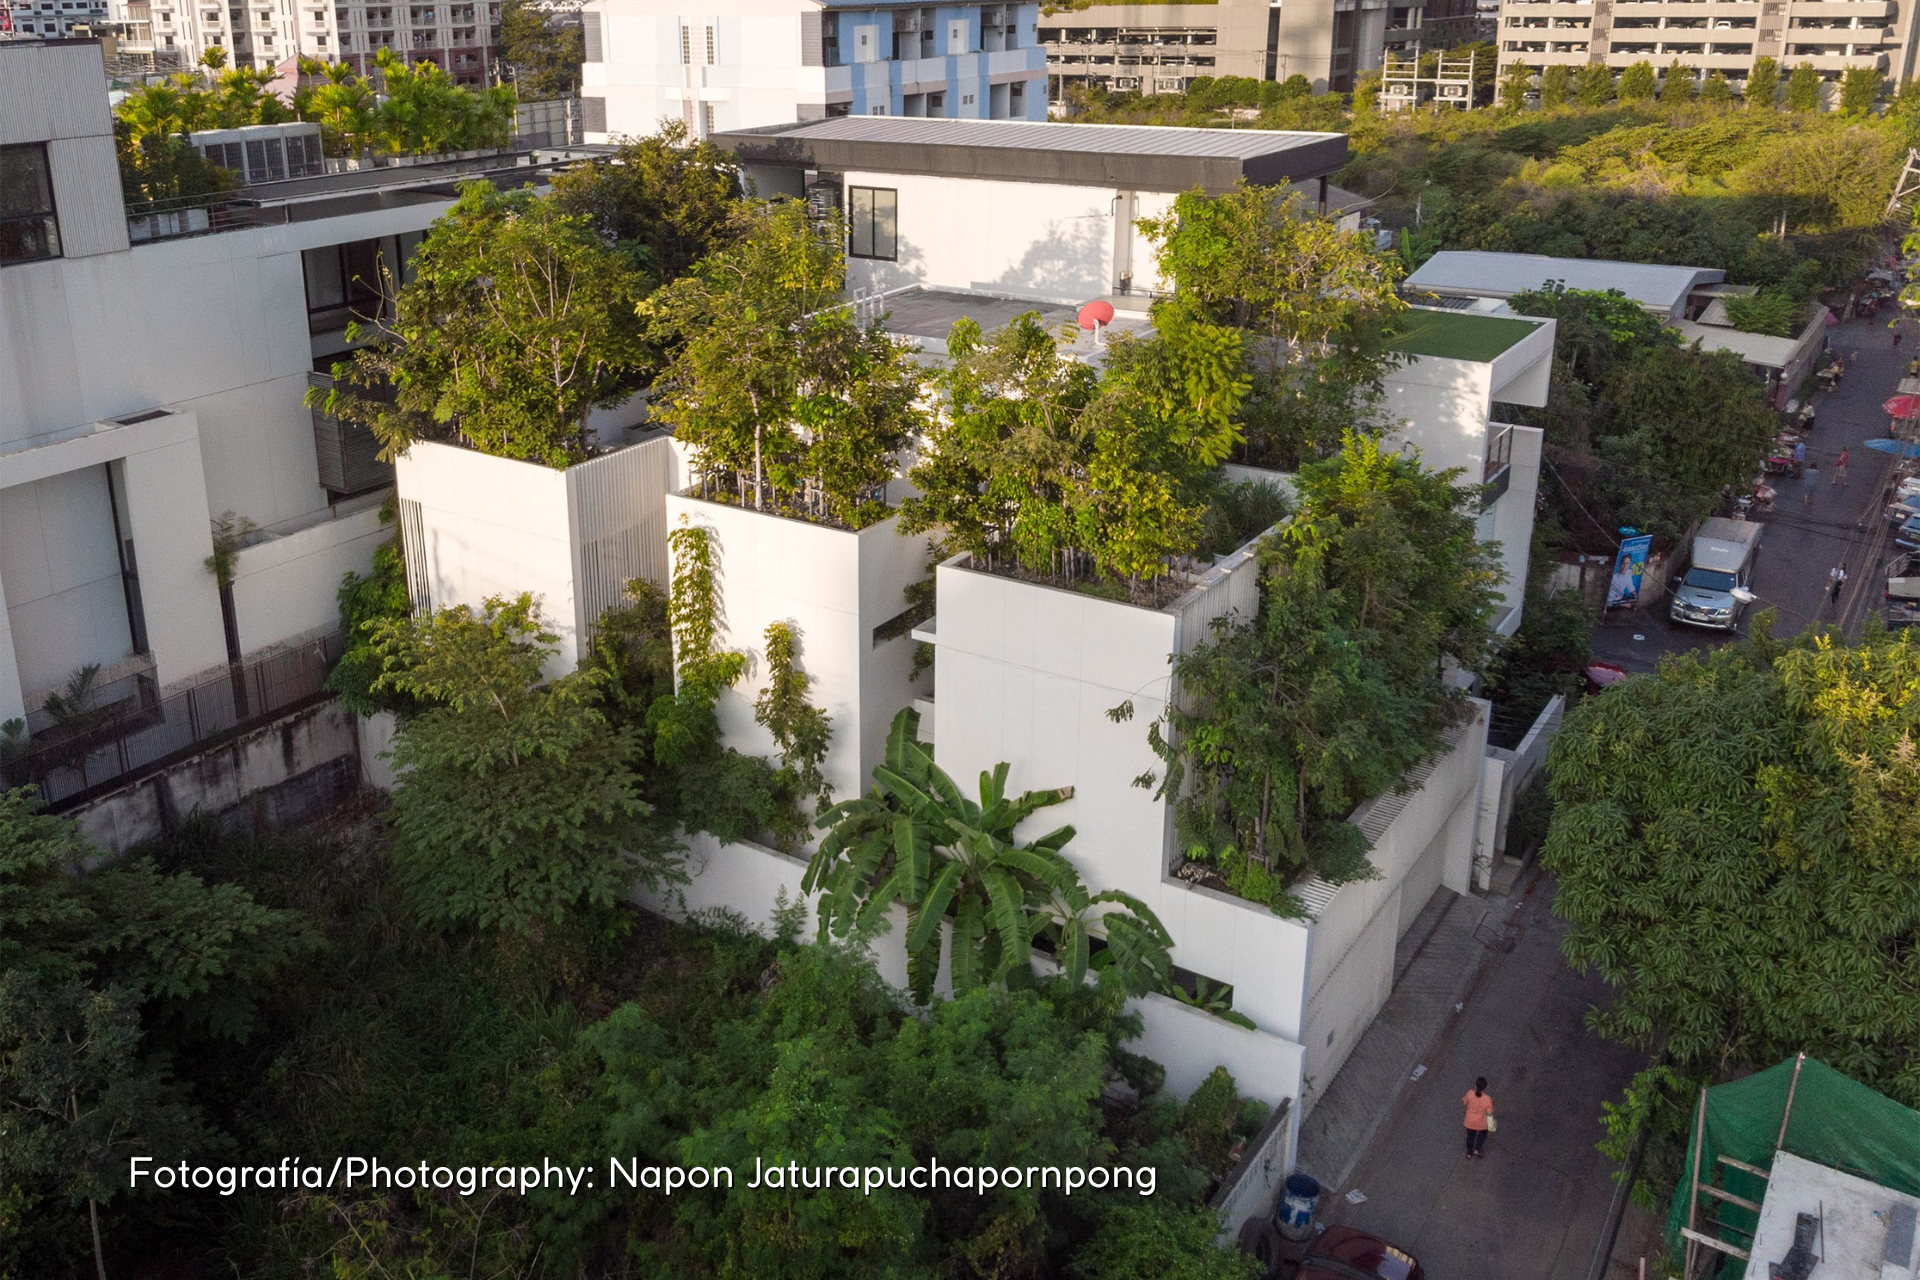 Forest House: reintegrating greenery in a high-density metropolitan area